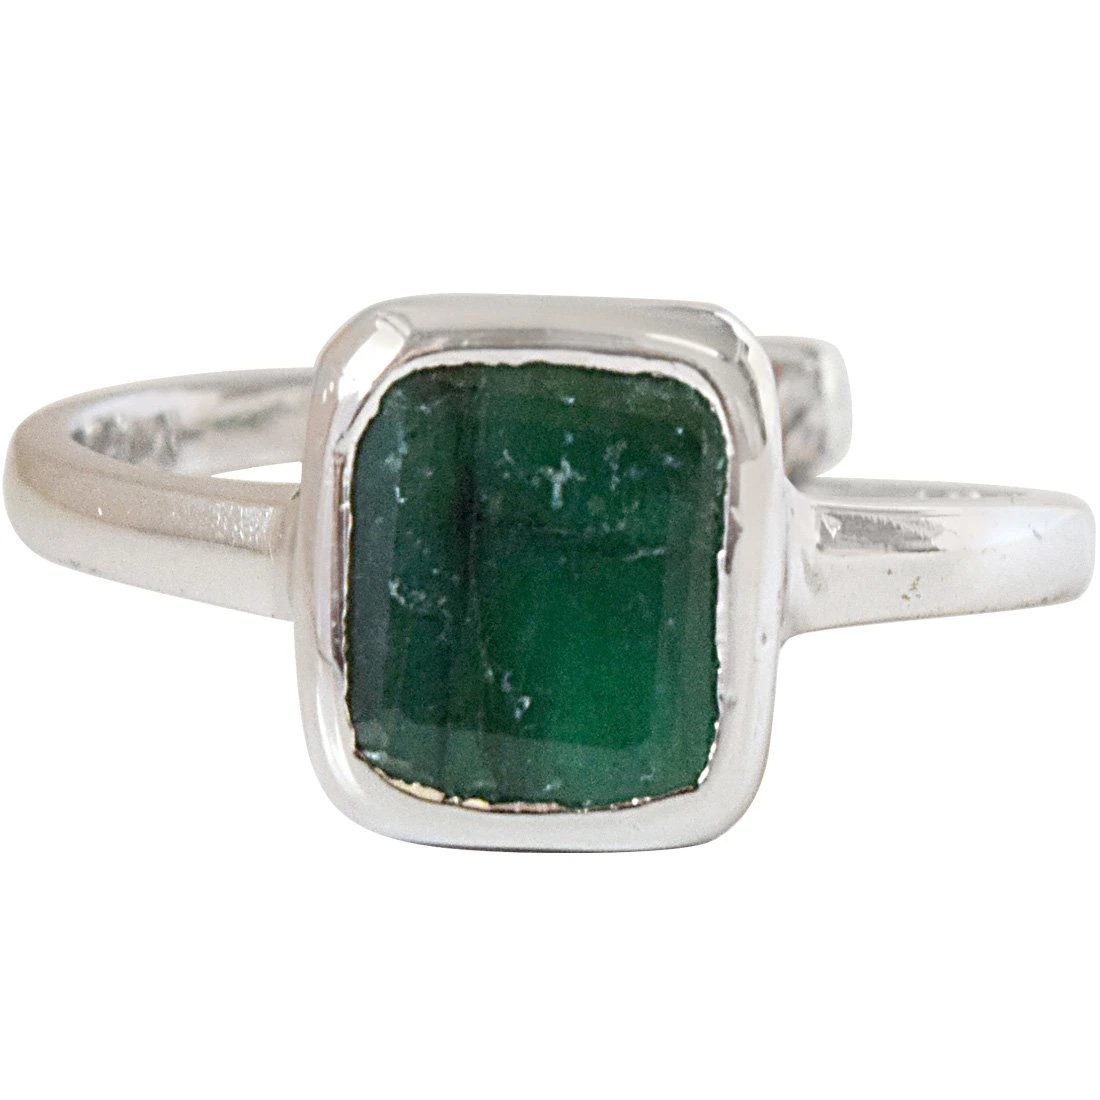 2.81cts Square Green Emerald and 925 Silver Adjustable Ring (GSR69)